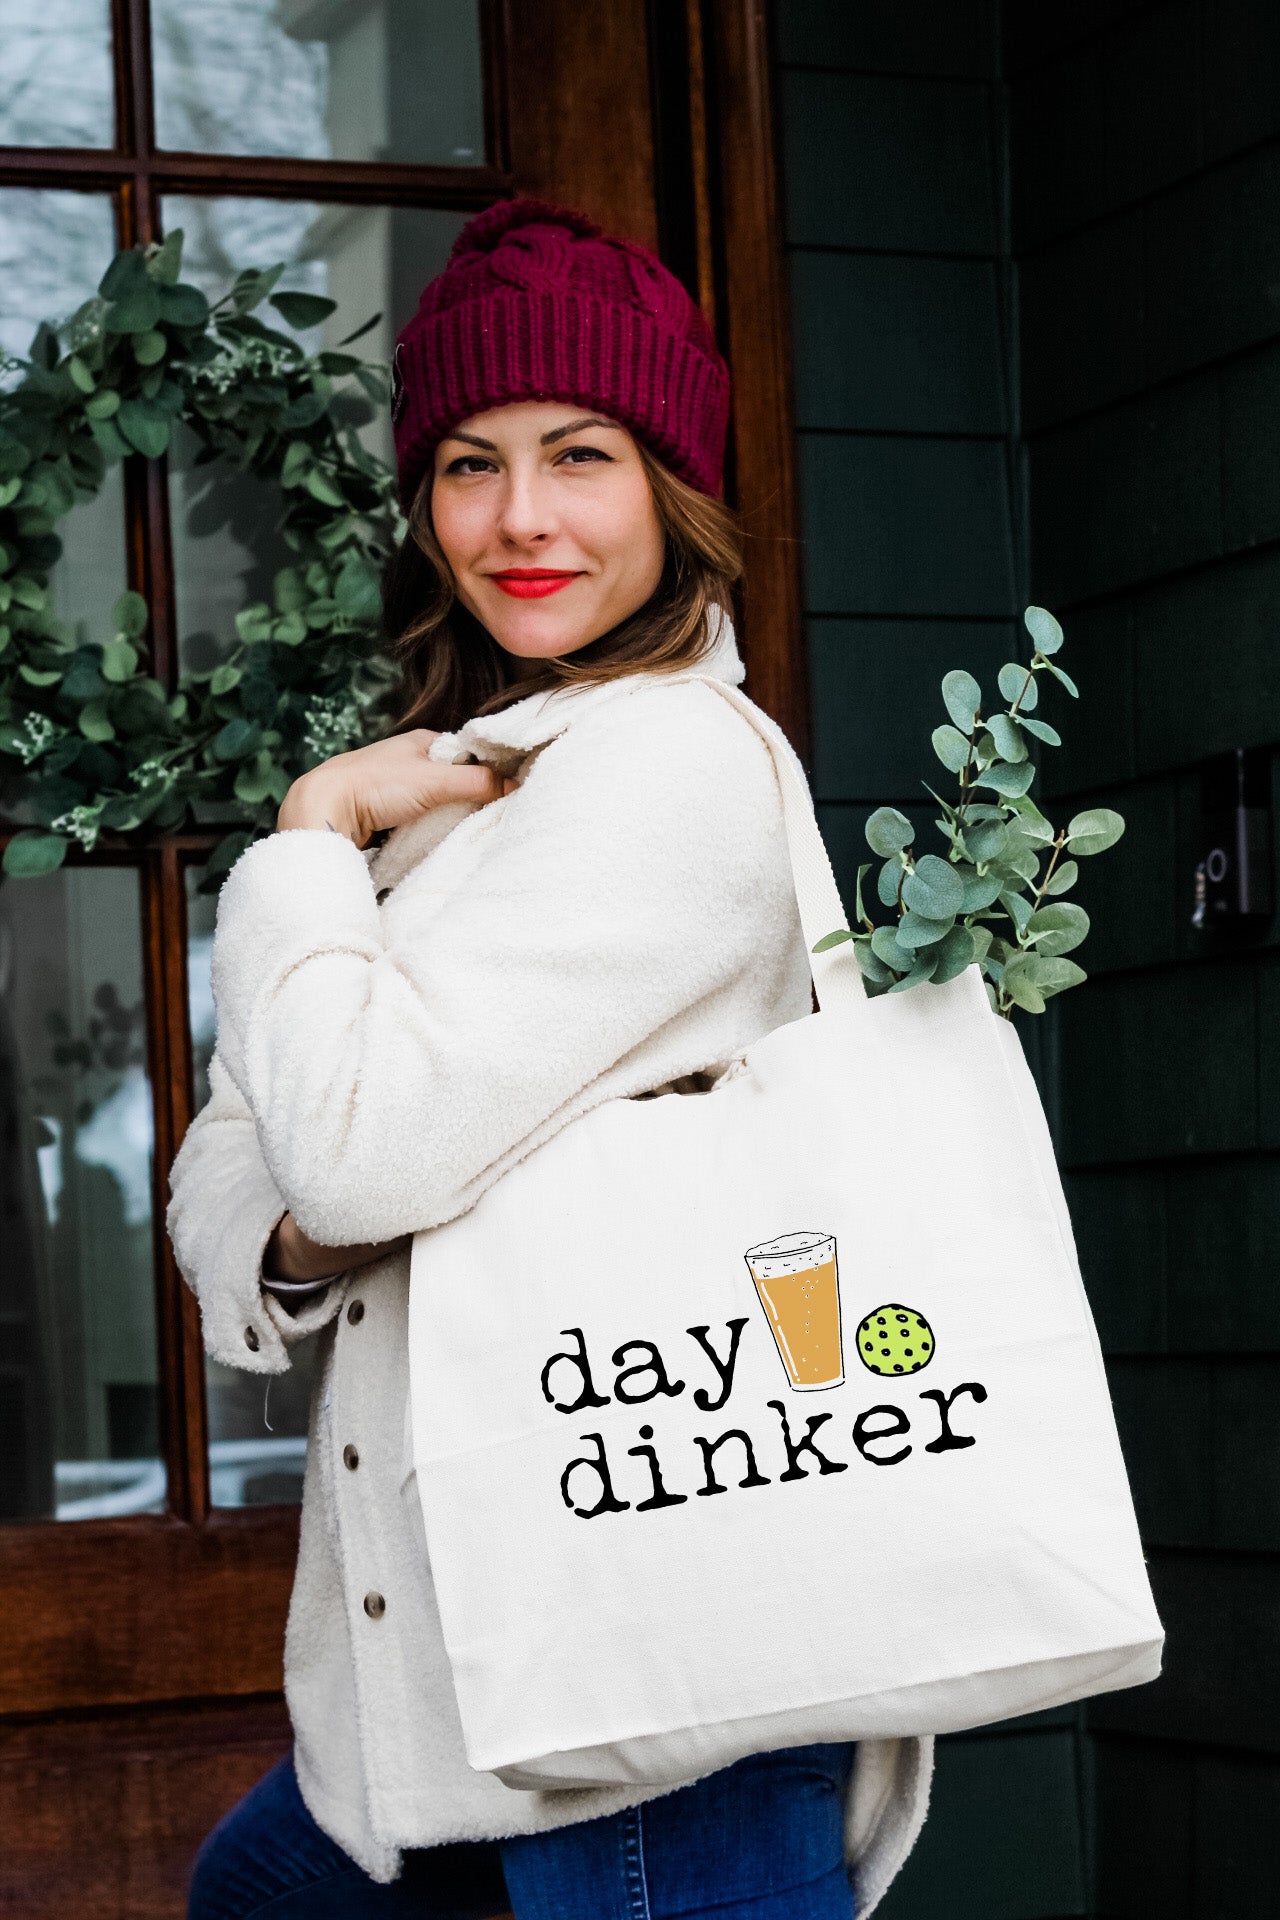 a woman carrying a bag that says day drinker